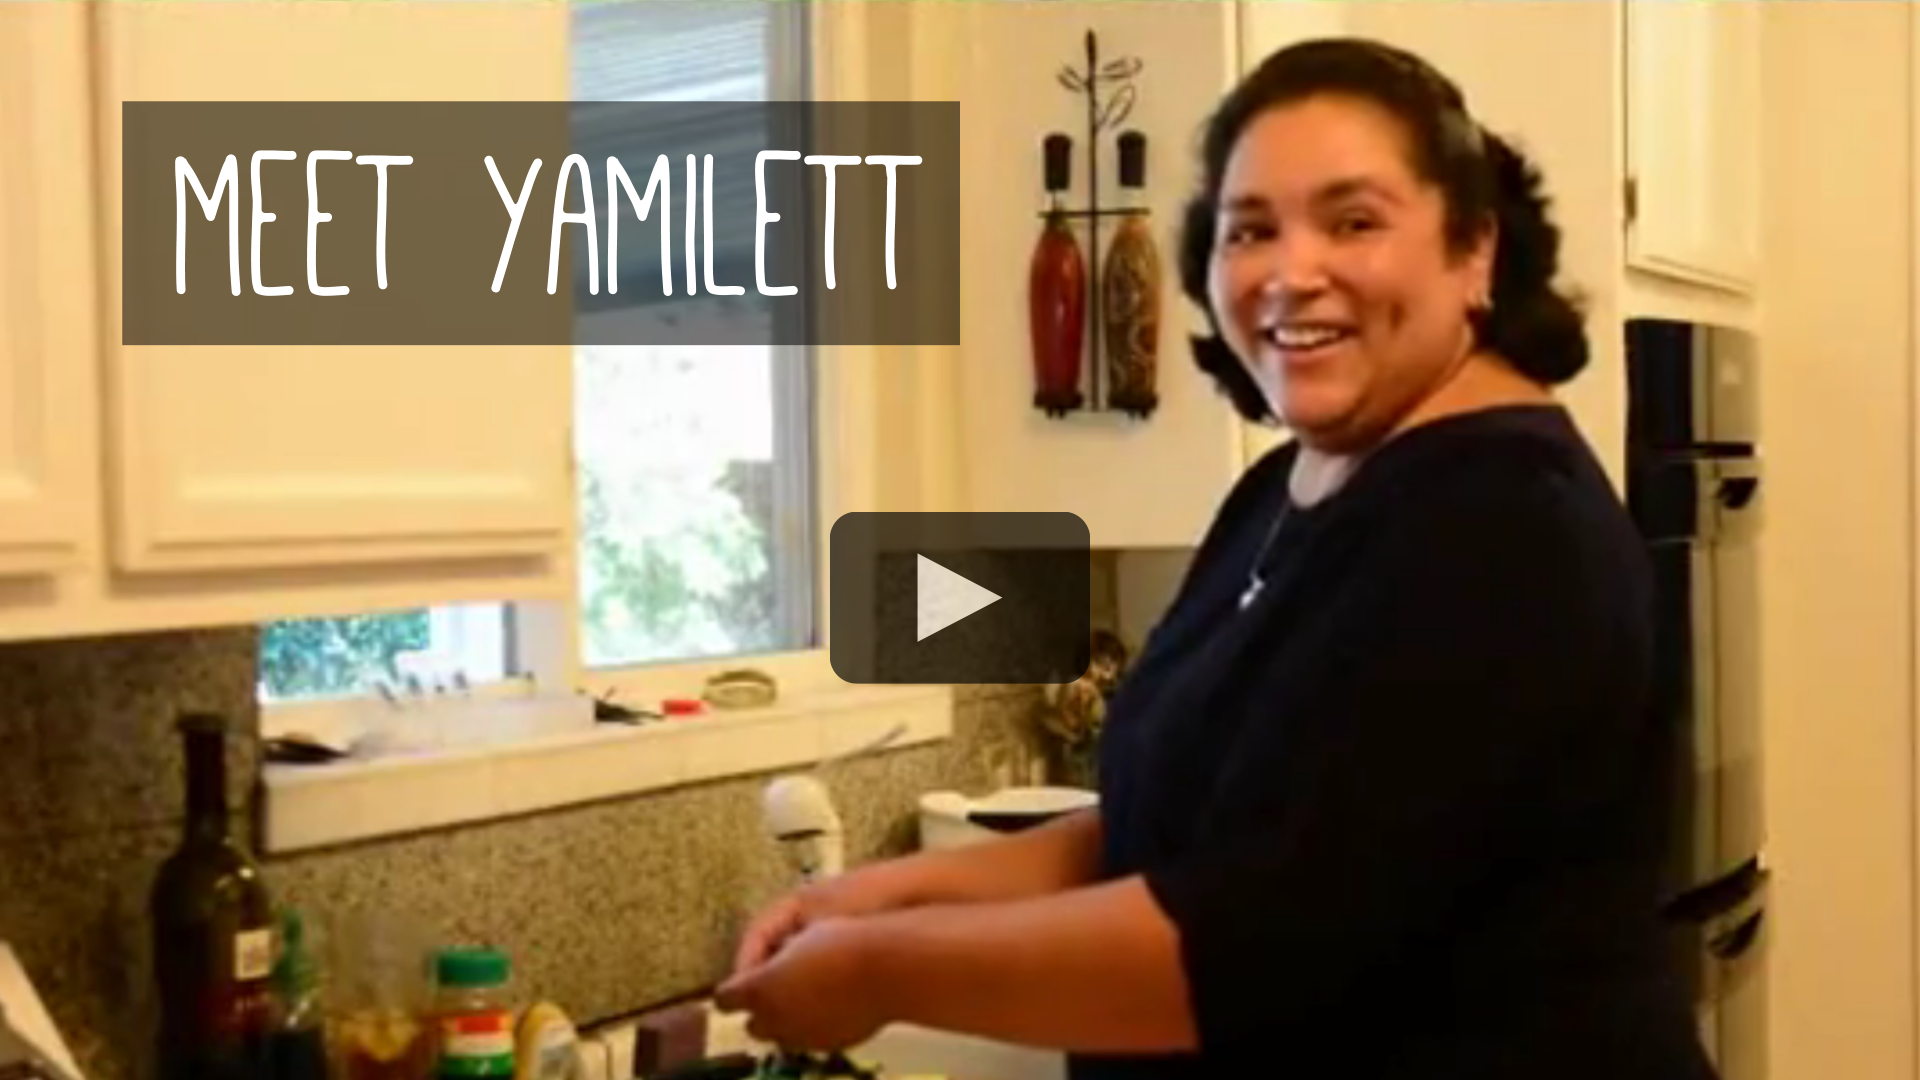 Yamilett was diagnosed with triple negative breast cancer and given little hope by another hospital. She was encouraged by a friend to get a second opinion from Northbay Healthcare. This is her story.